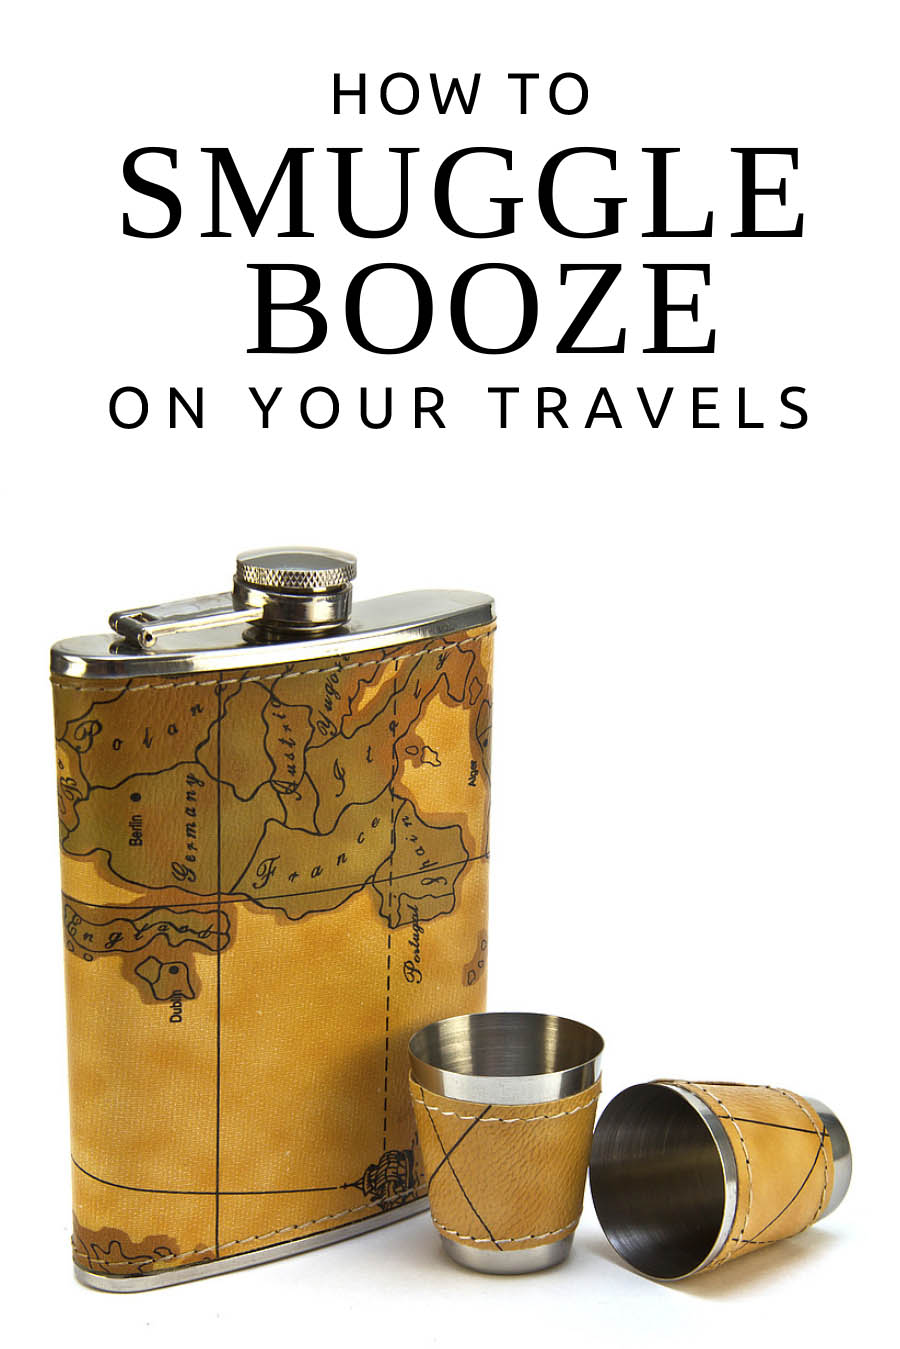 How to Smuggle Booze on Your Travels